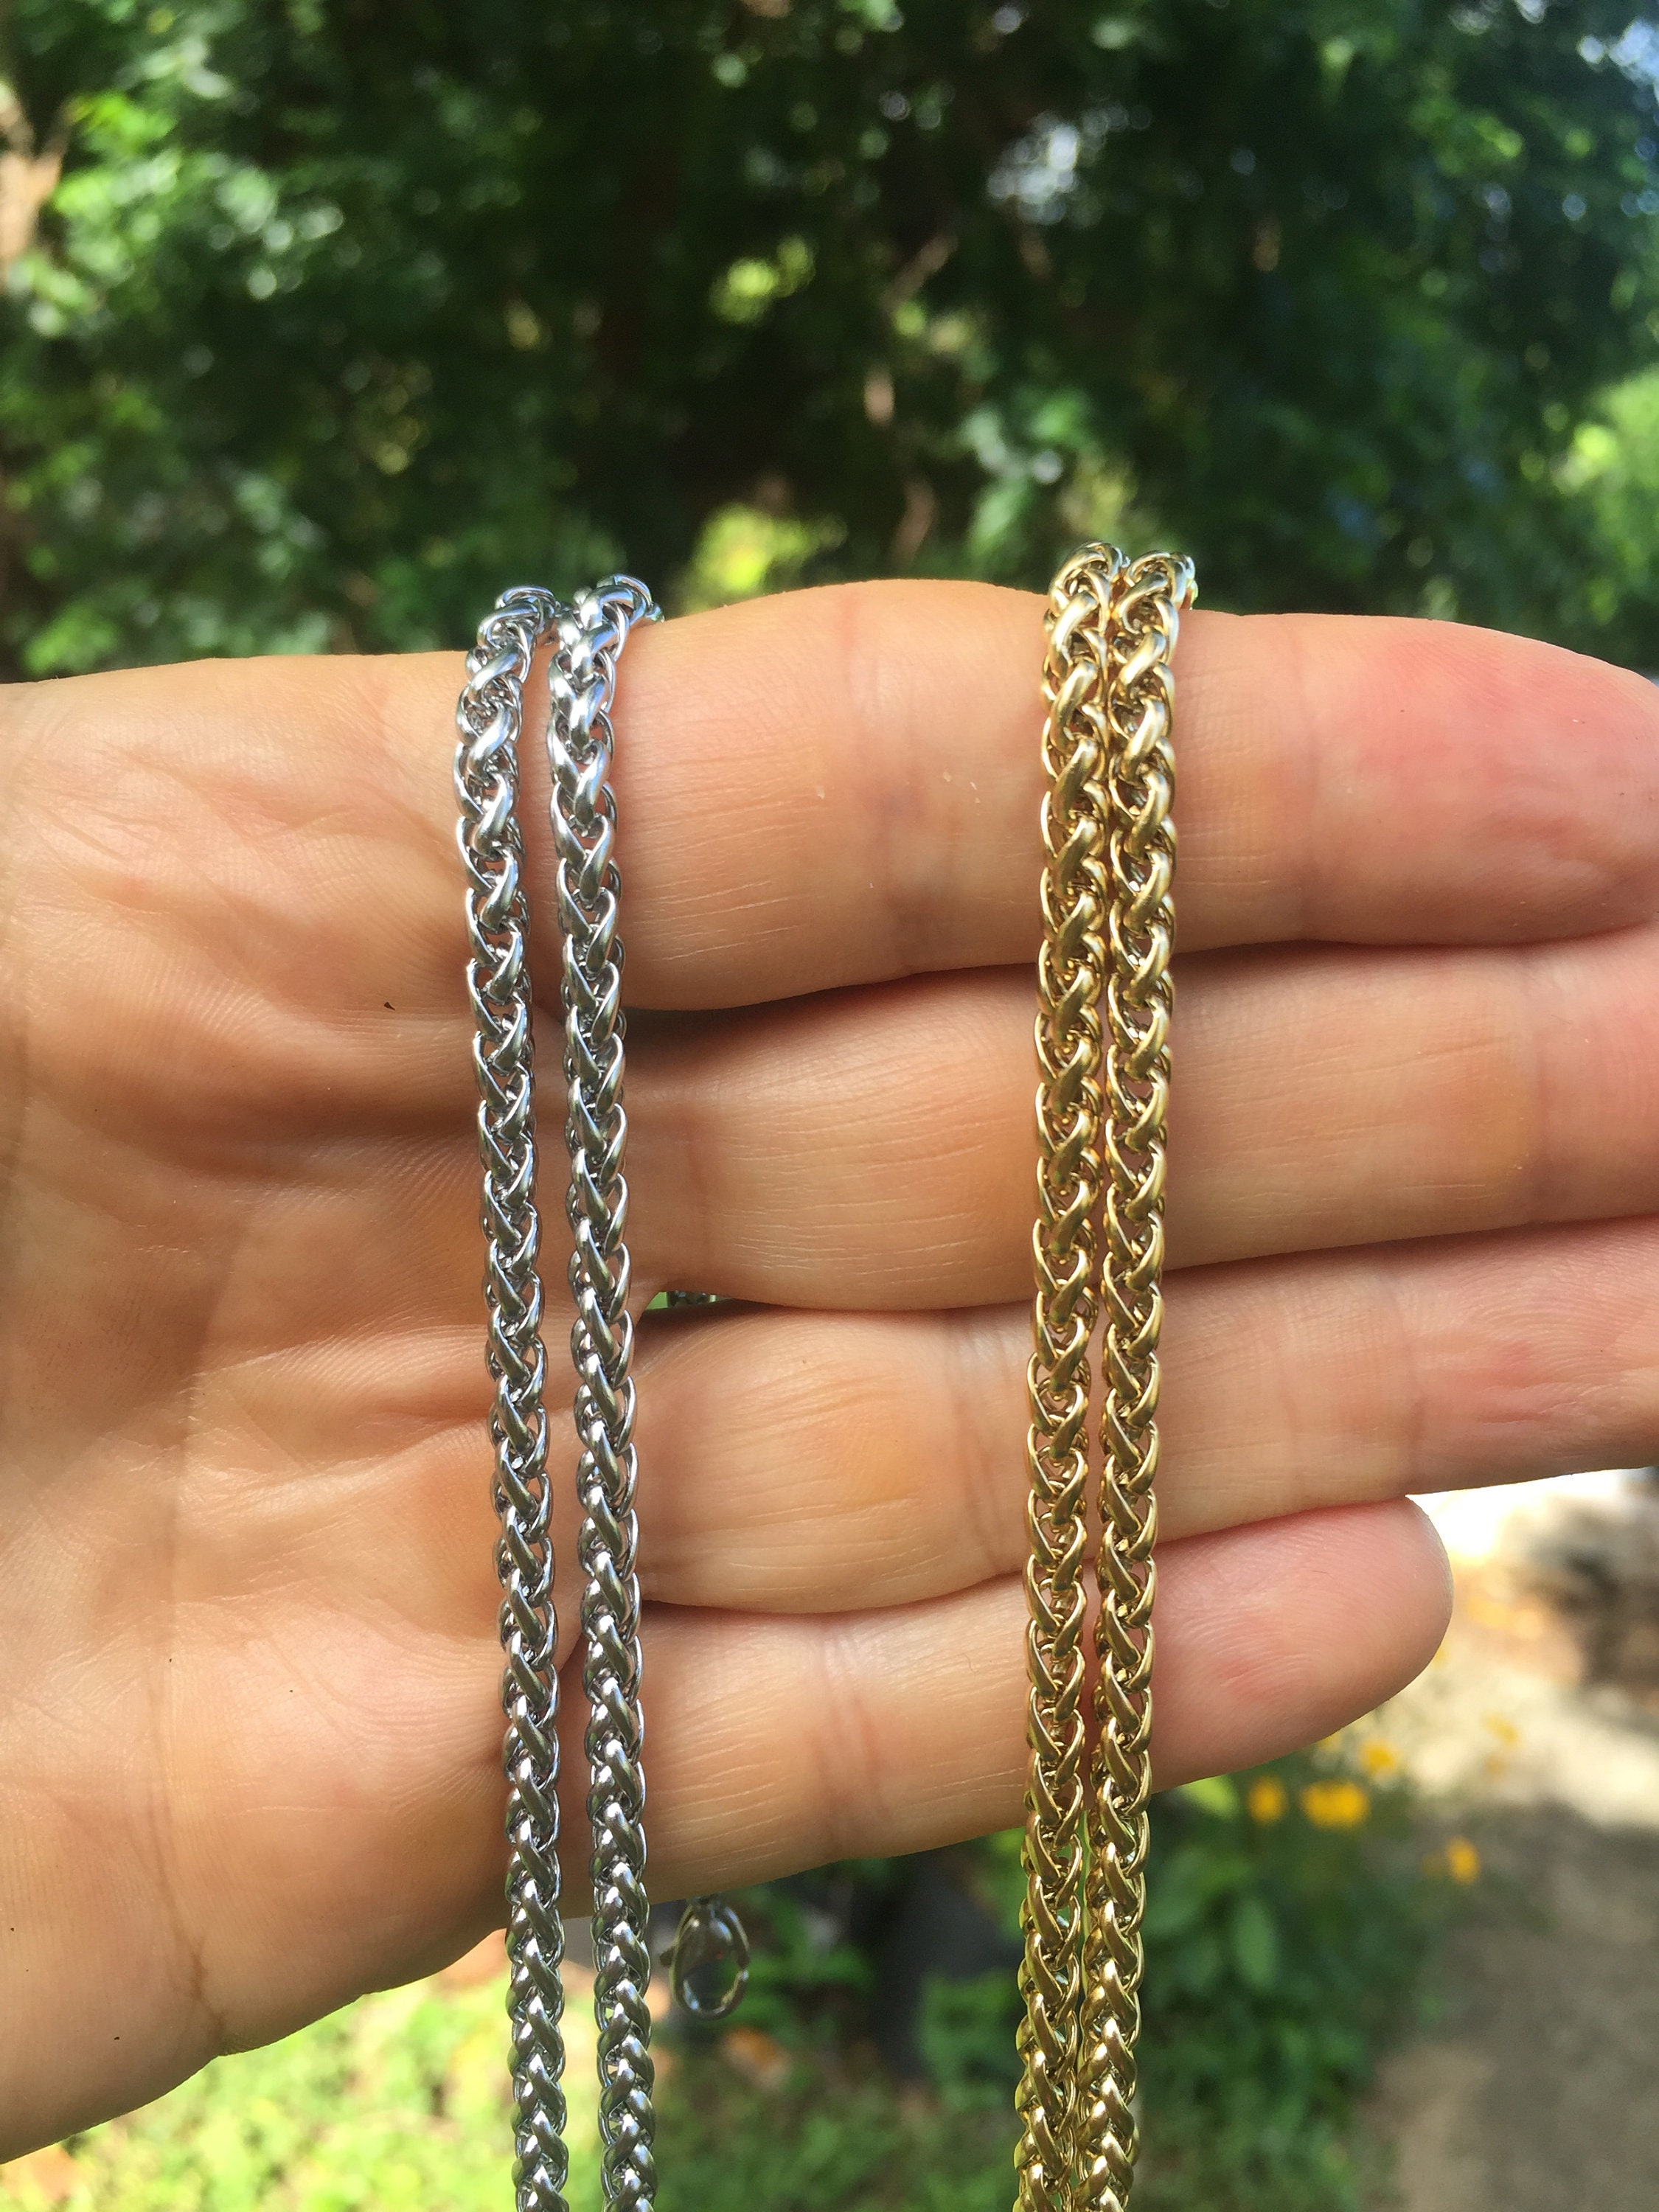 Men's 3.0mm Wheat Chain Necklace in Solid Stainless Steel - 22